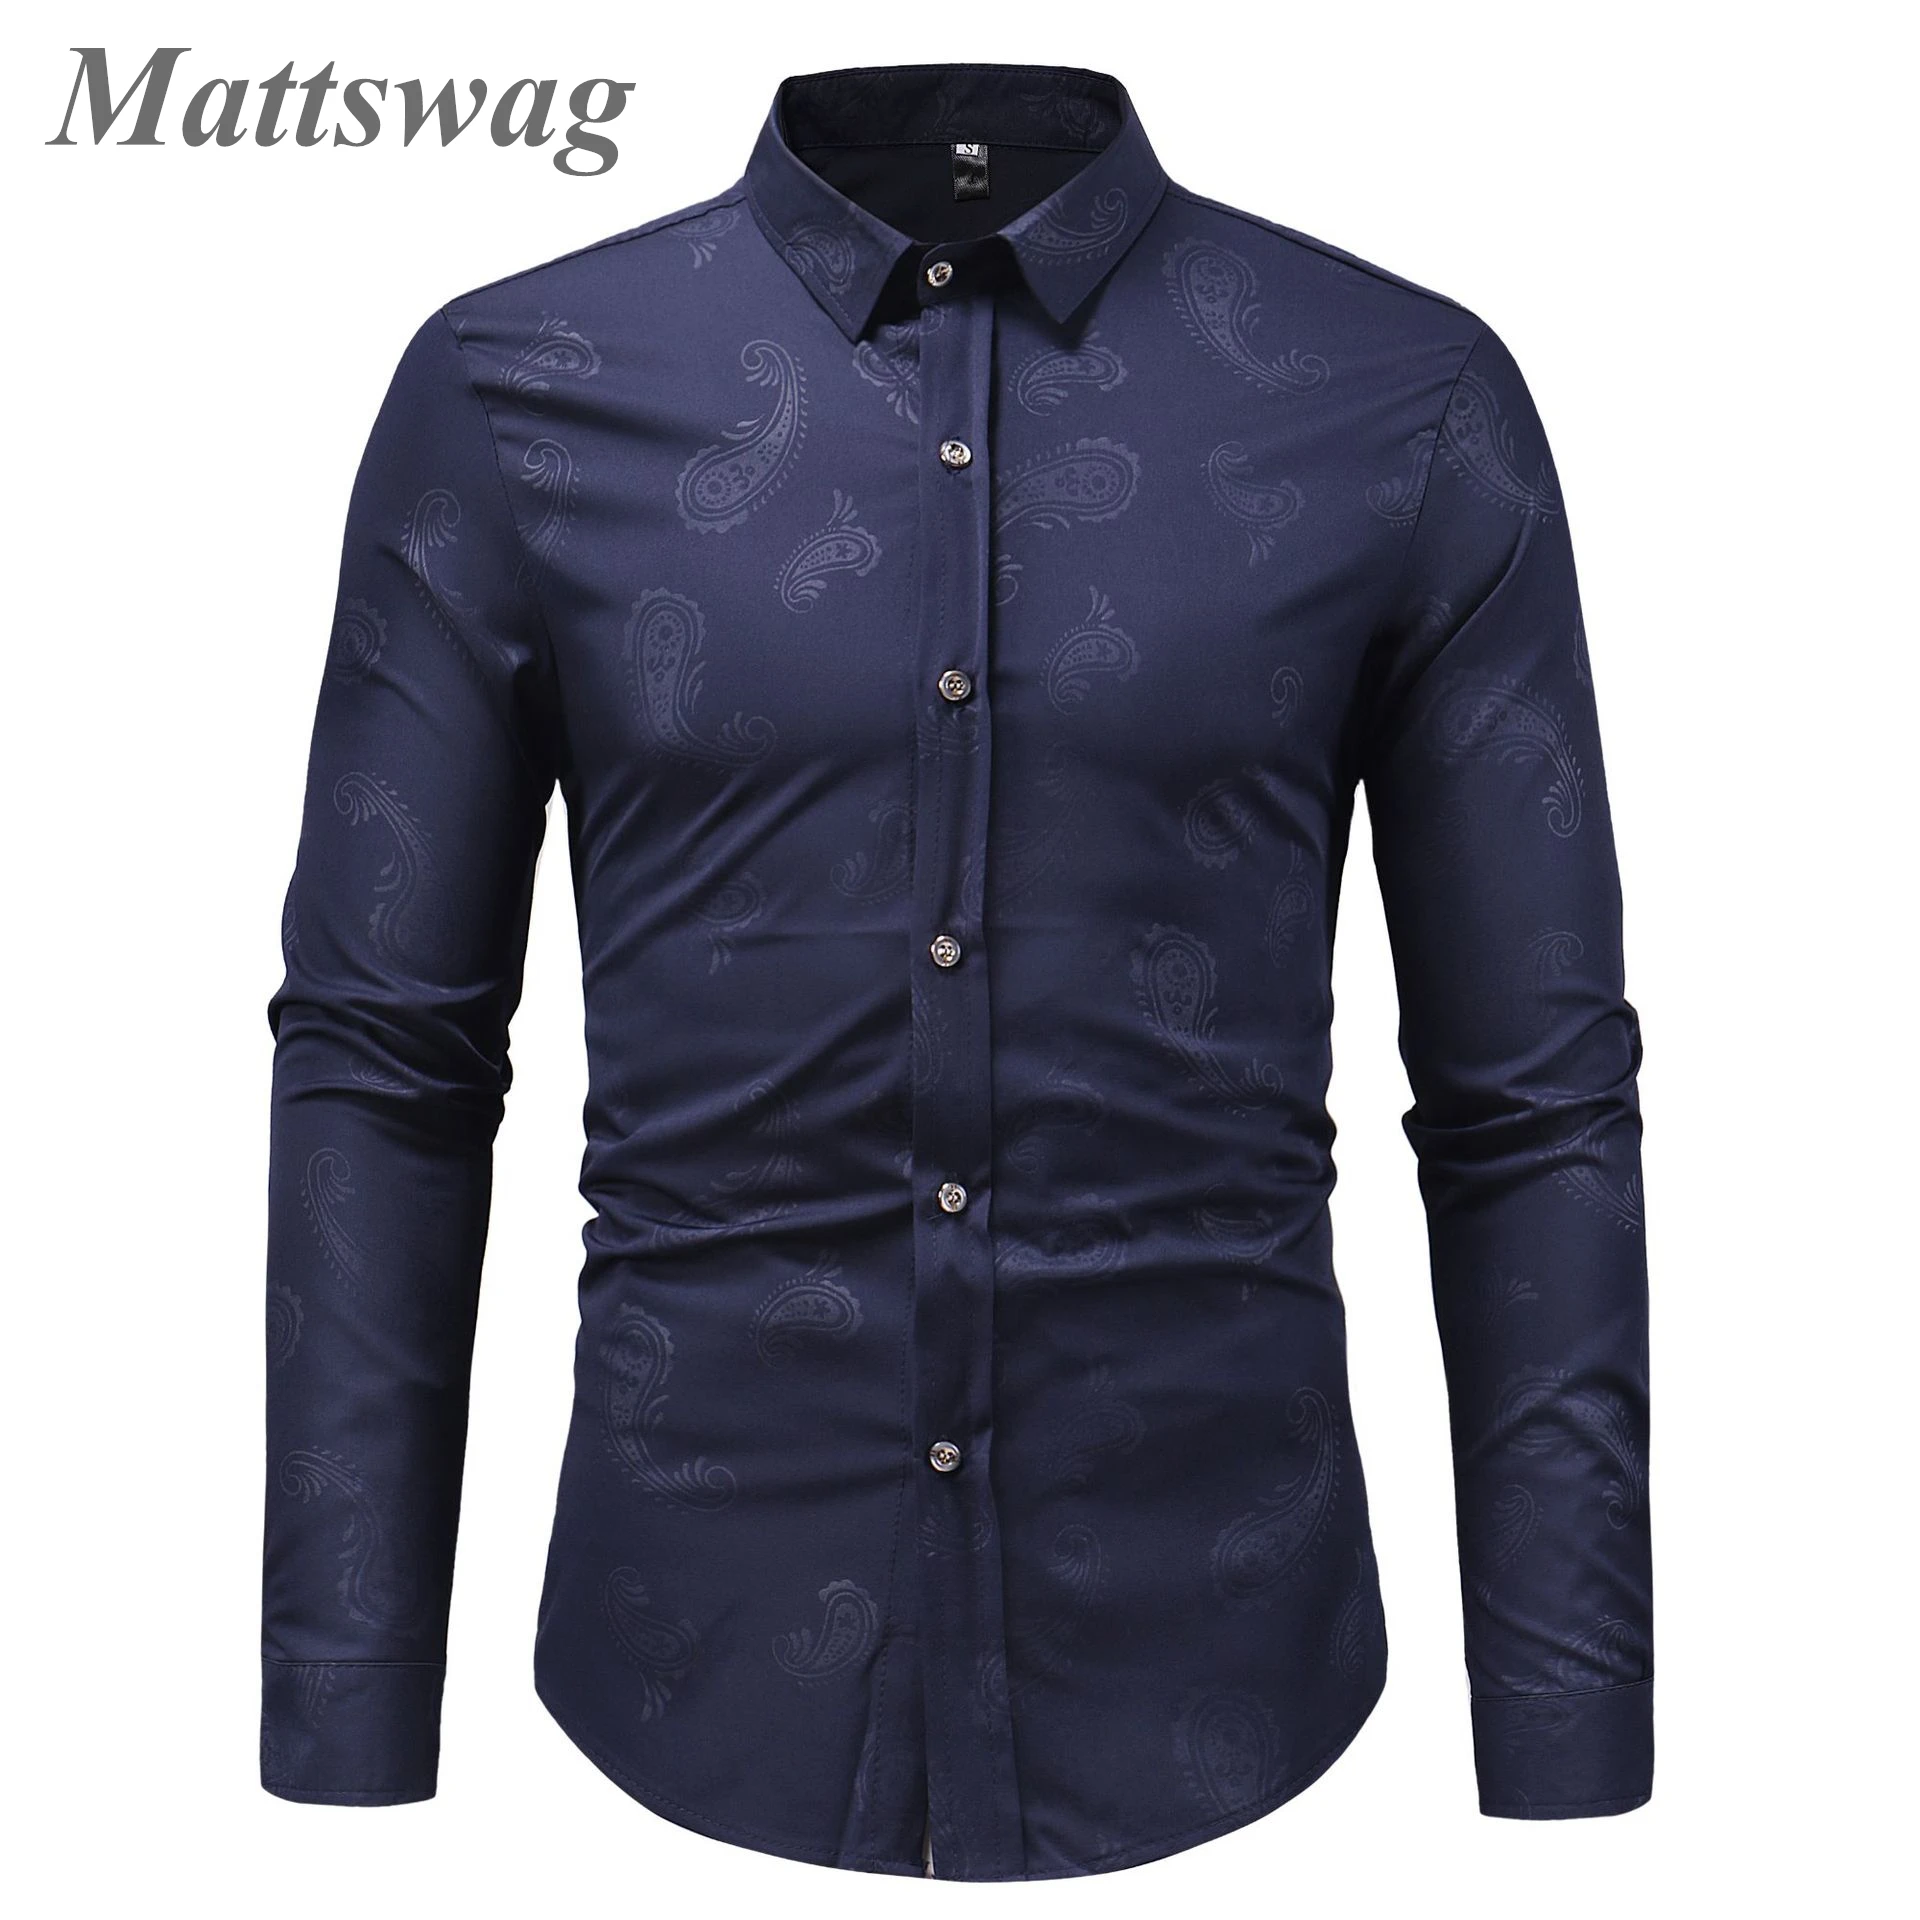 

Light Luxury Formal Dress Shirt For Men Fashion Hidden Pattern Printed Clothing Male Wedding Party Banquet Dinner Chemise Hombre